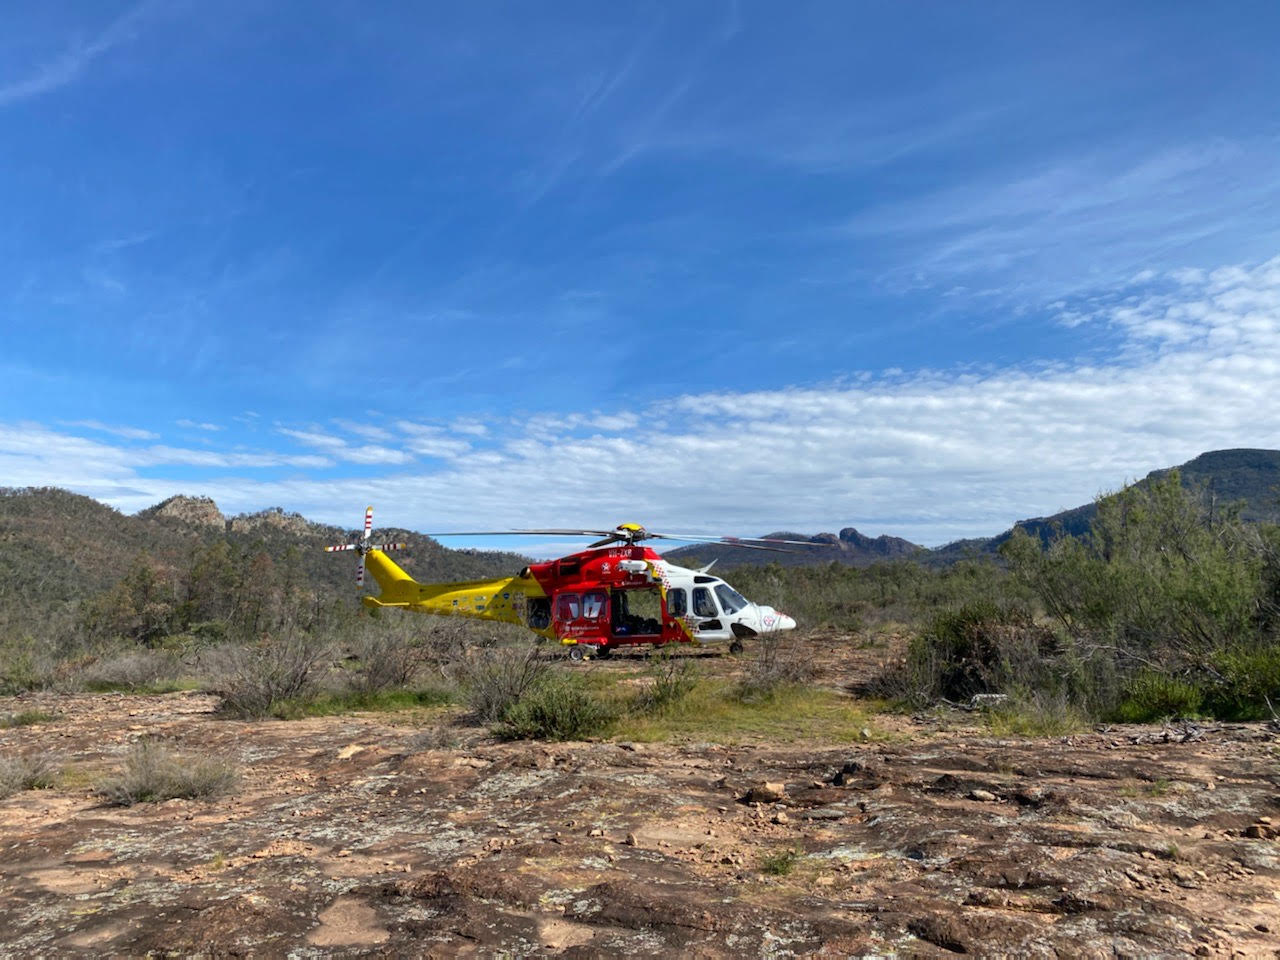 Westpac Rescue Helicopter was called to Waa Gorge on Monday after a rock climber fell.